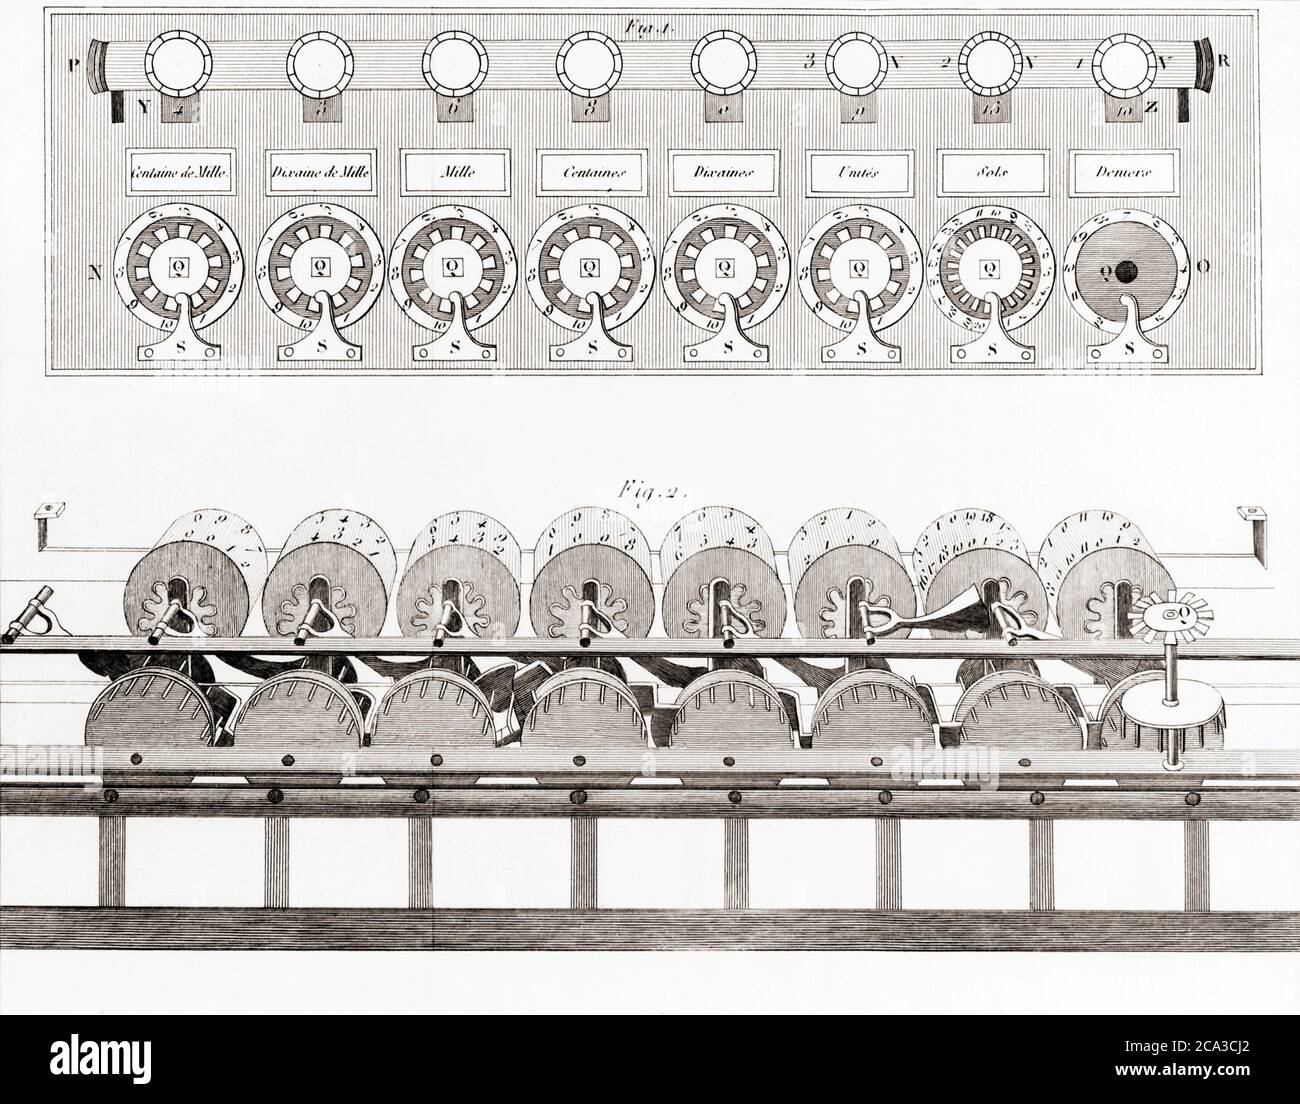 Calculating machine designed by Blaise Pascal. Pascalâ.s calculators were also known as Pascalines. After an illustration by Louvet in Œuvres de Stock Photo